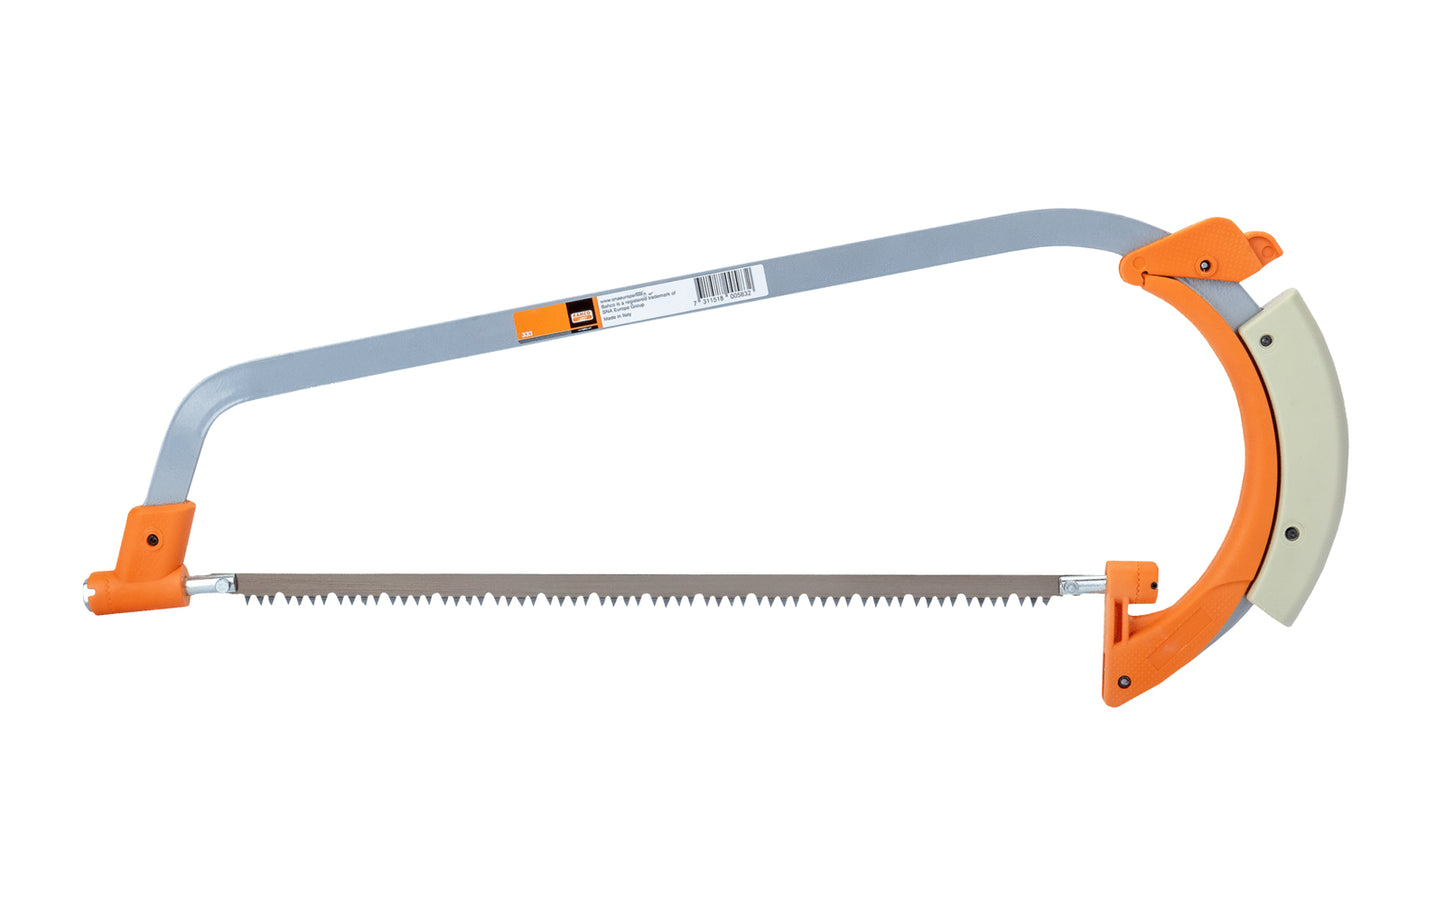 This Bahco 333 Bow Saw is a general purpose bow saw for gardening & home repairs. It has a reversible blade, hardened for durability, which can be rotated around its long axis. Includes type 333-5 blade for wood cutting. Steel frame. 14" (350 mm)  cutting edge length. Bahco Model 333. 7311518005832